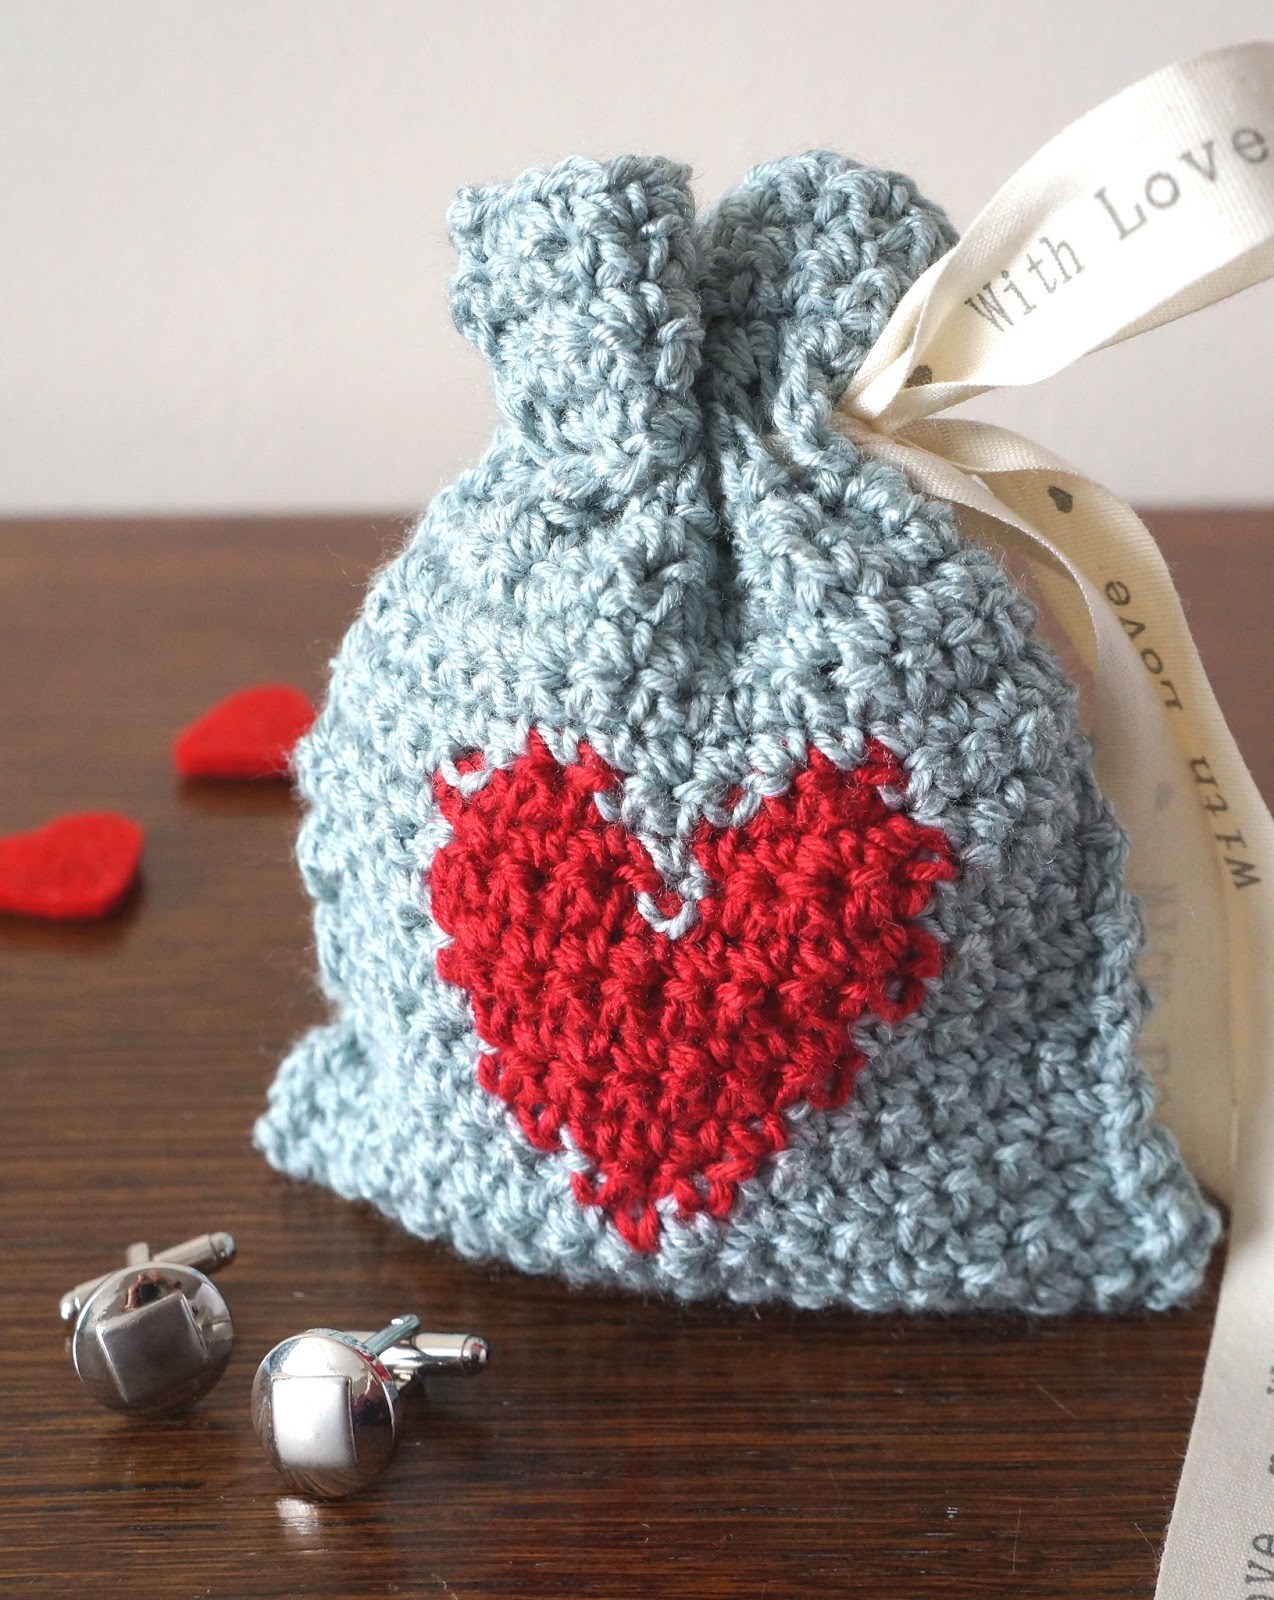 Adorable Crochet Crafts for Valentines Day| Valentines Day, Valentines Day Crafts, Crochet Crafts, DIY Crafts, Holiday Crafts, Holiday Craft Ideas, Holiday Fun,Quick Crochet Crafts. #CrochetCrafts #ValentinesDayCrafts #DIY